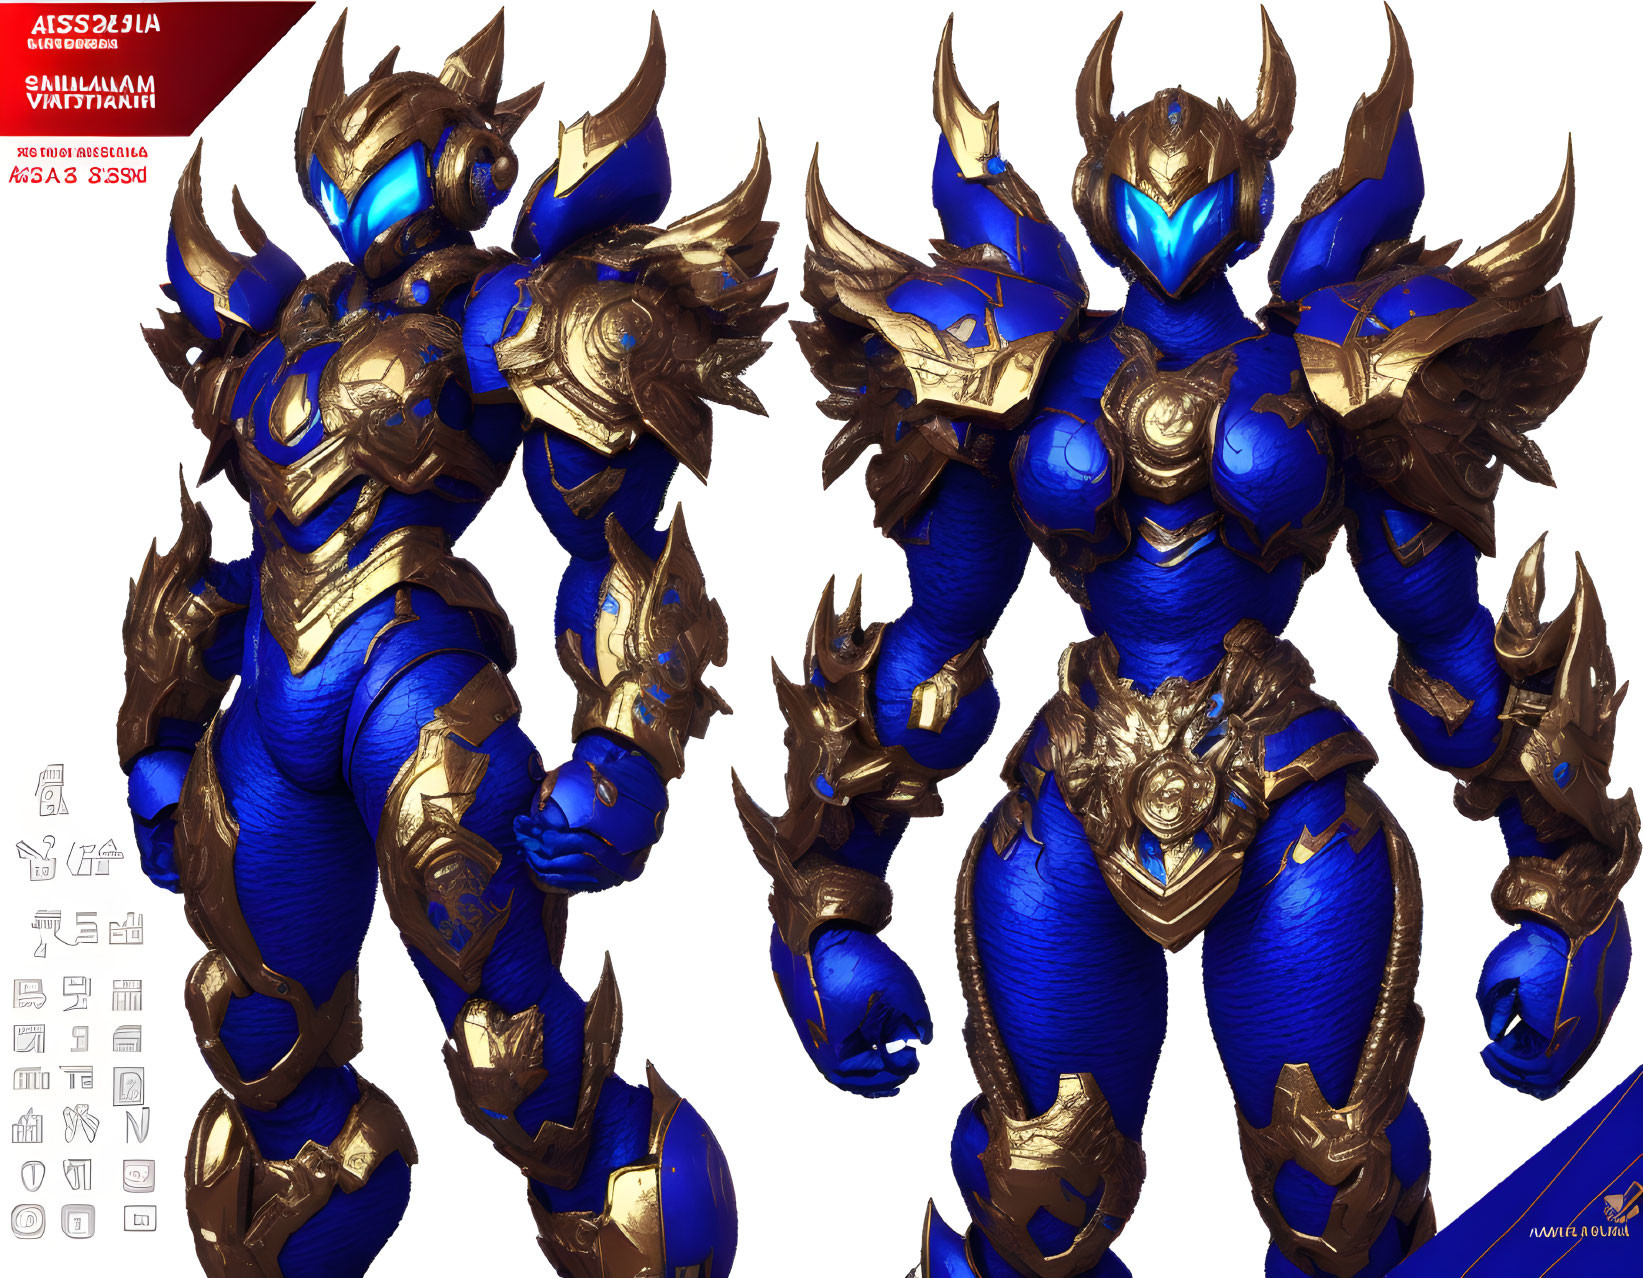 Detailed Concept Art: Character in Blue and Gold Armor with Horned Helmet